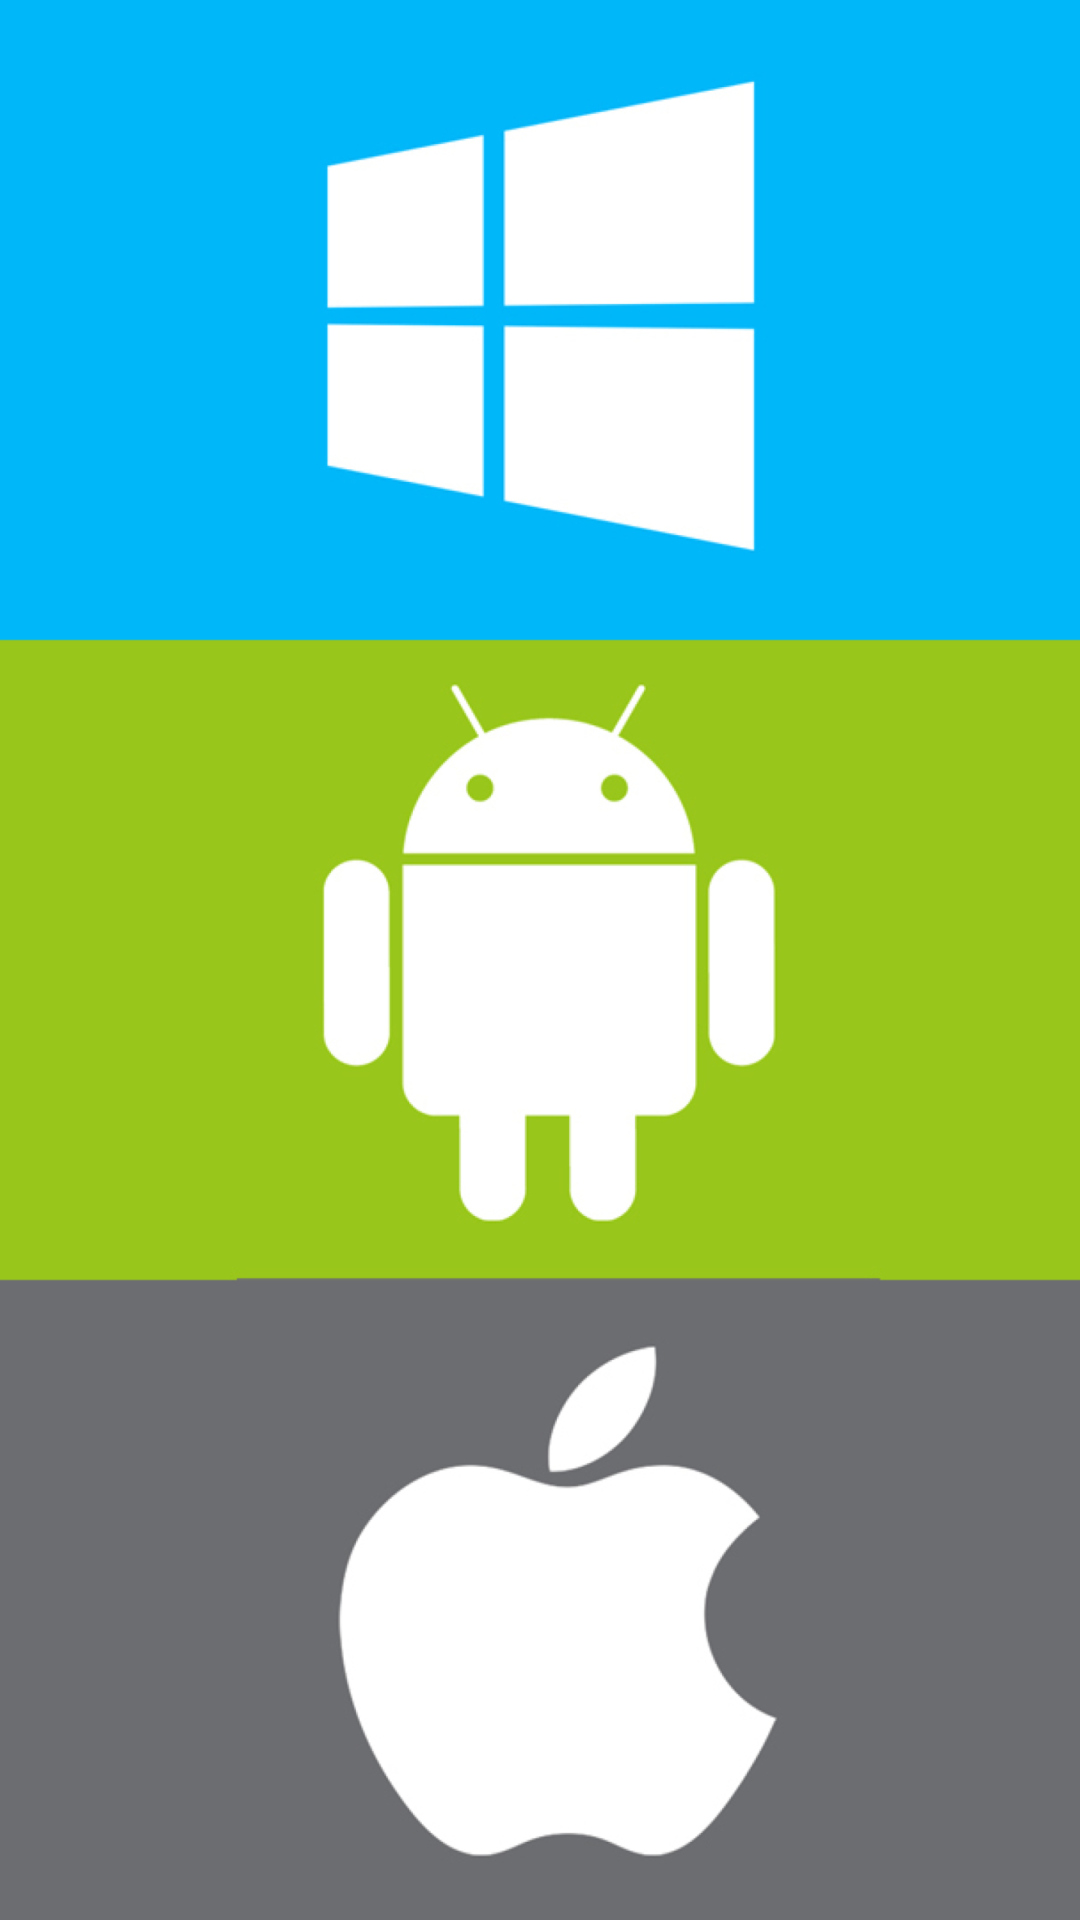 Das Windows, Apple, Android - What's Your Choice? Wallpaper 1080x1920